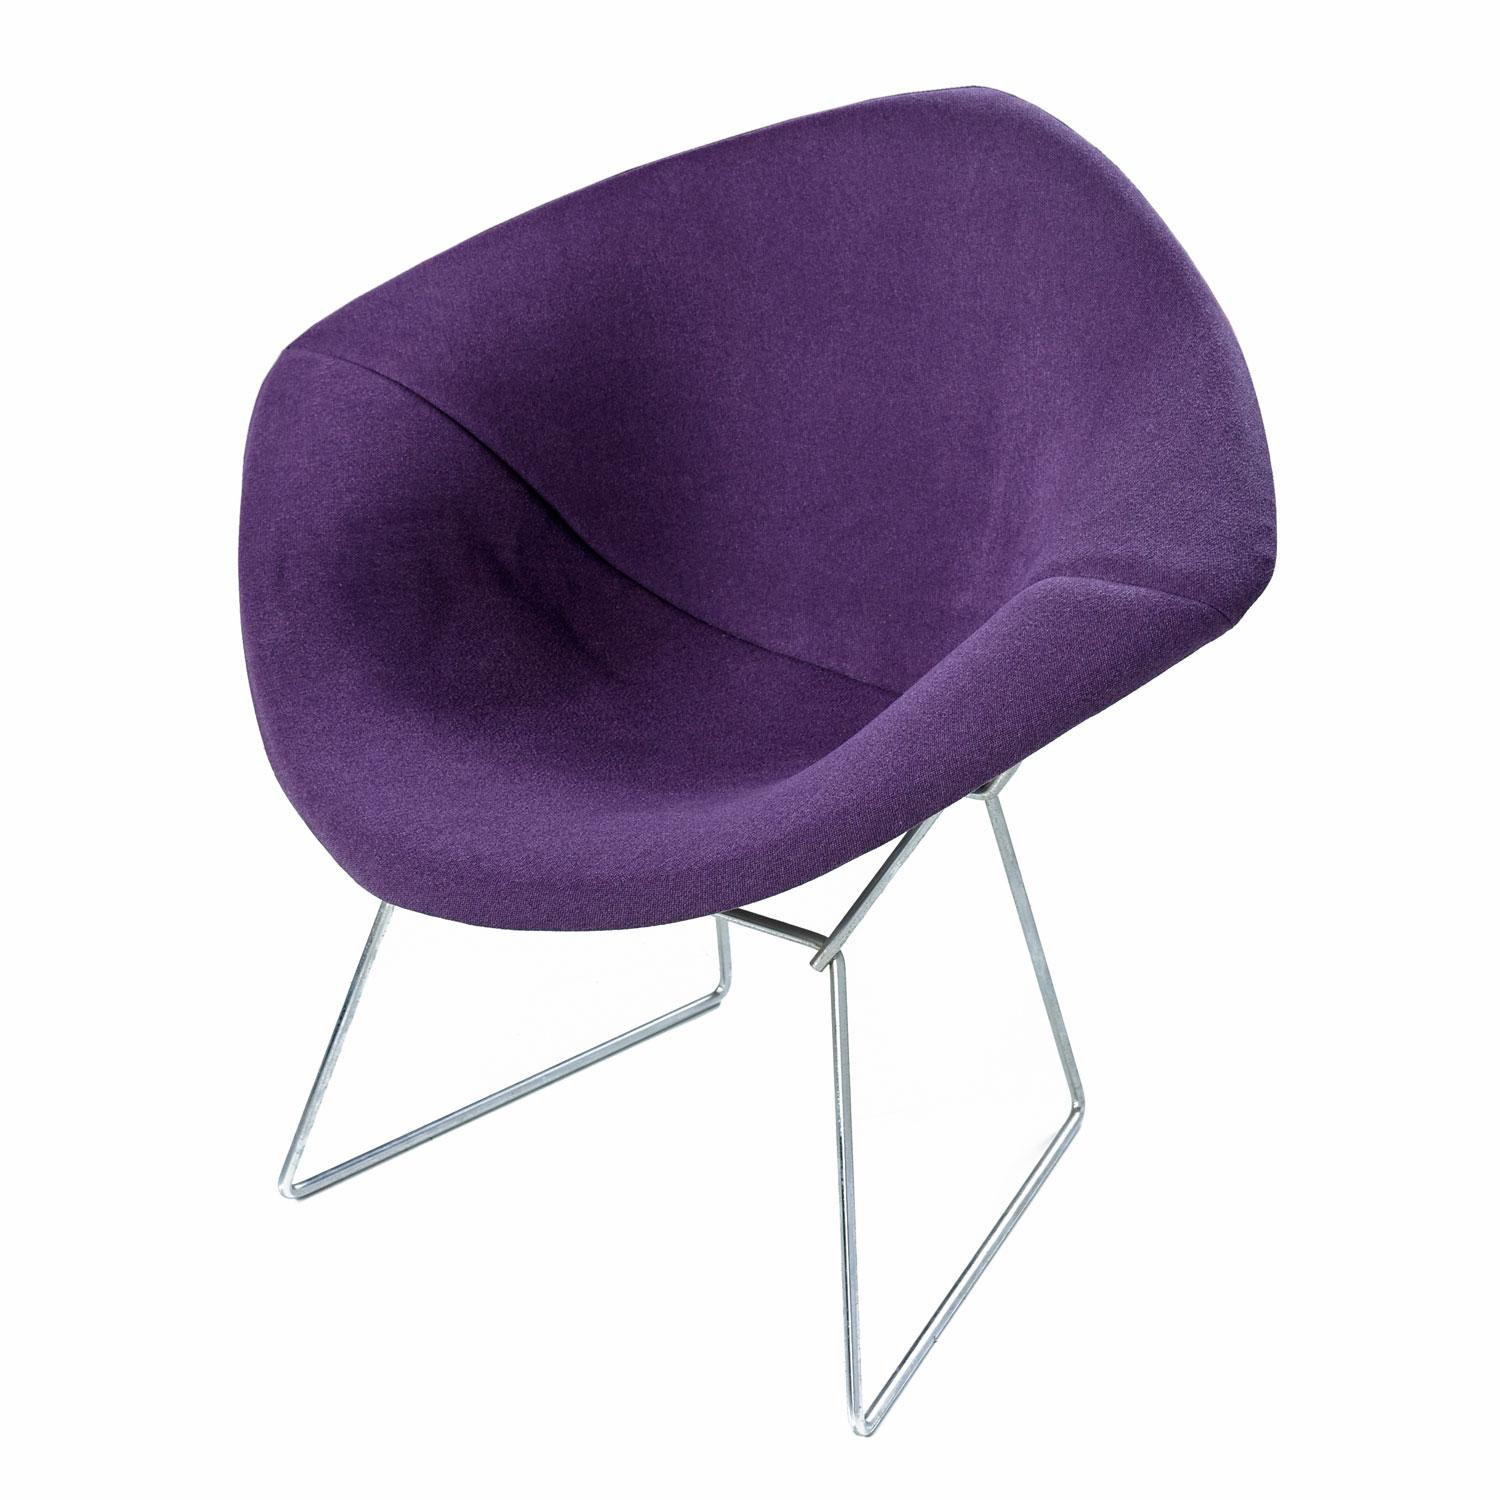 Mid-Century Modern Diamond Chair by Harry Bertoia for Knoll, Full Cover Plum Knoll Tweed For Sale